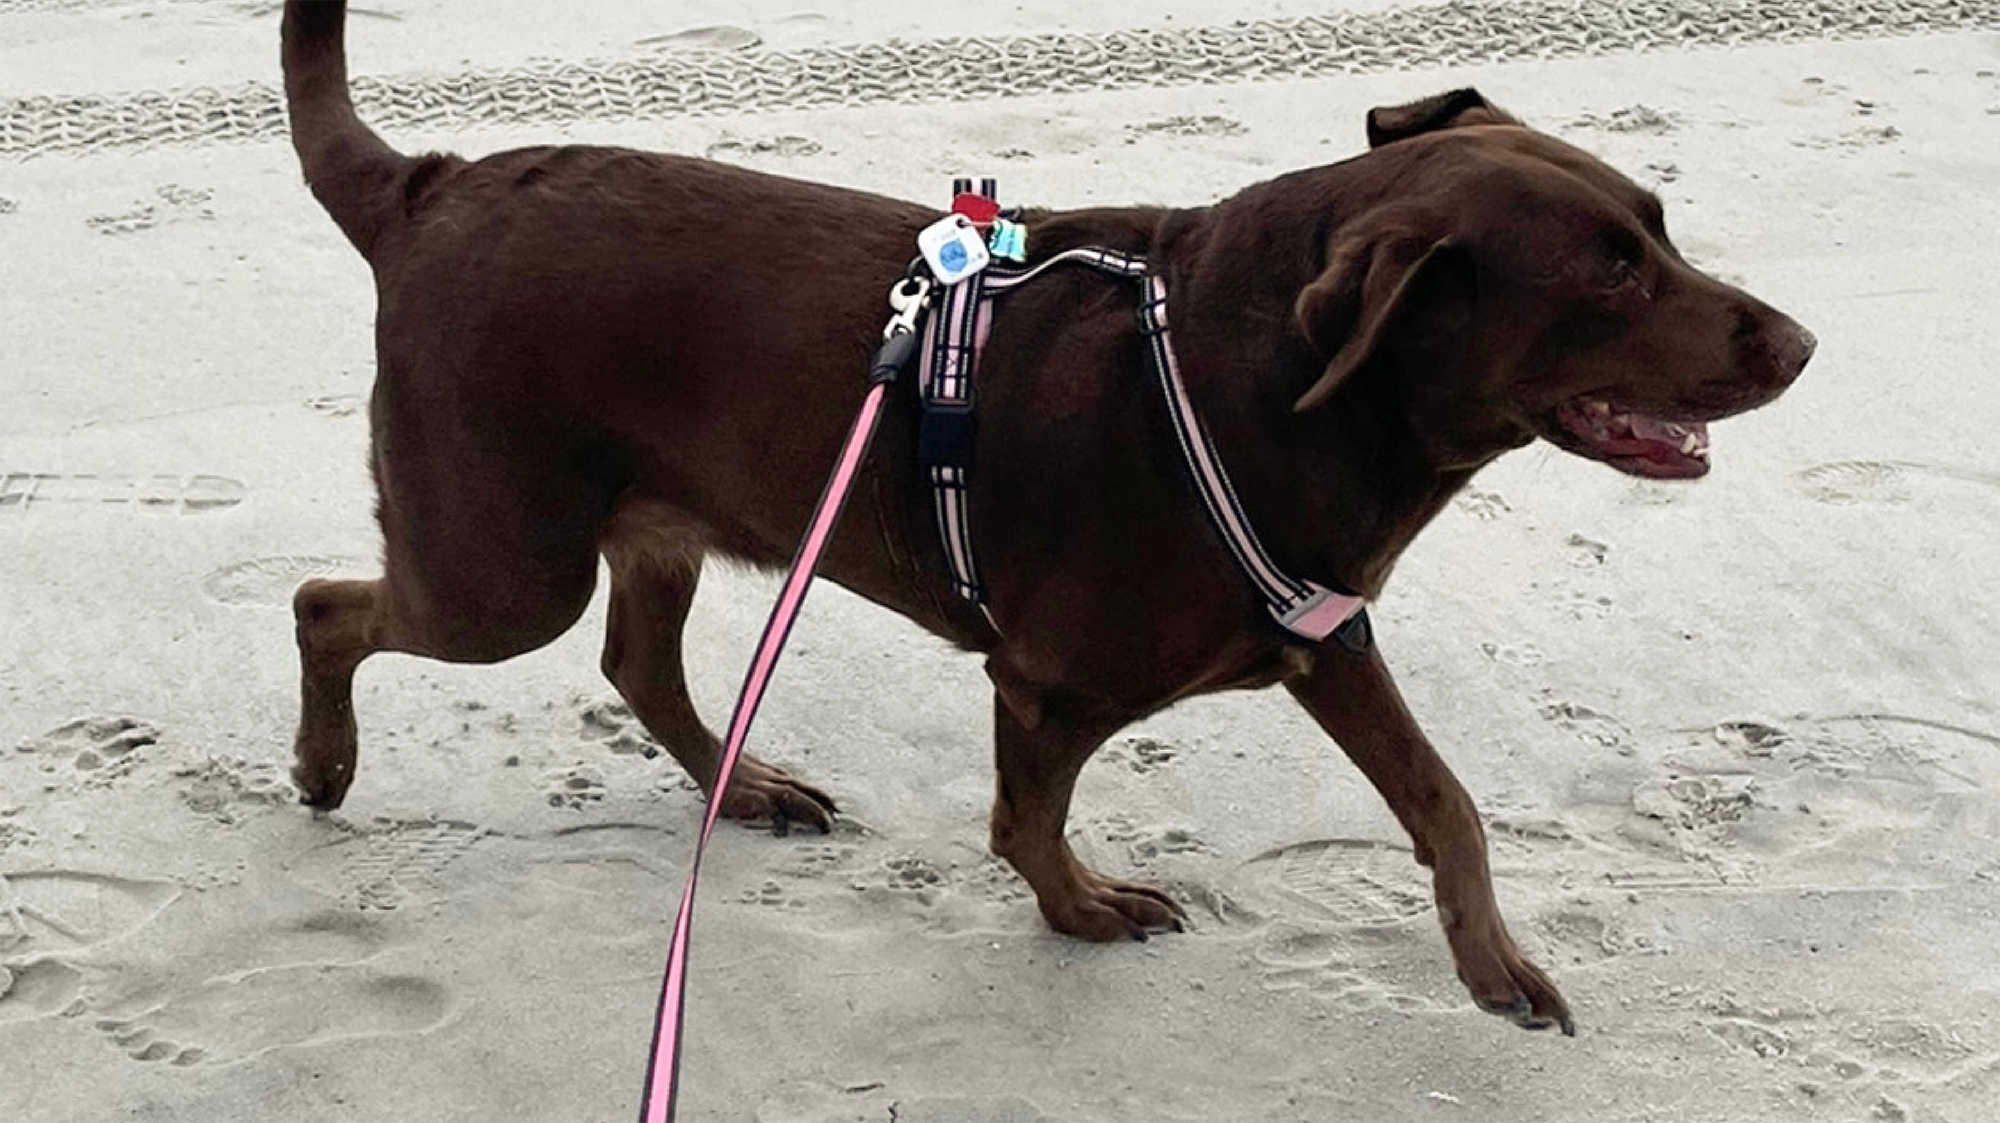 Nettie the Chocolate Lab at the beach